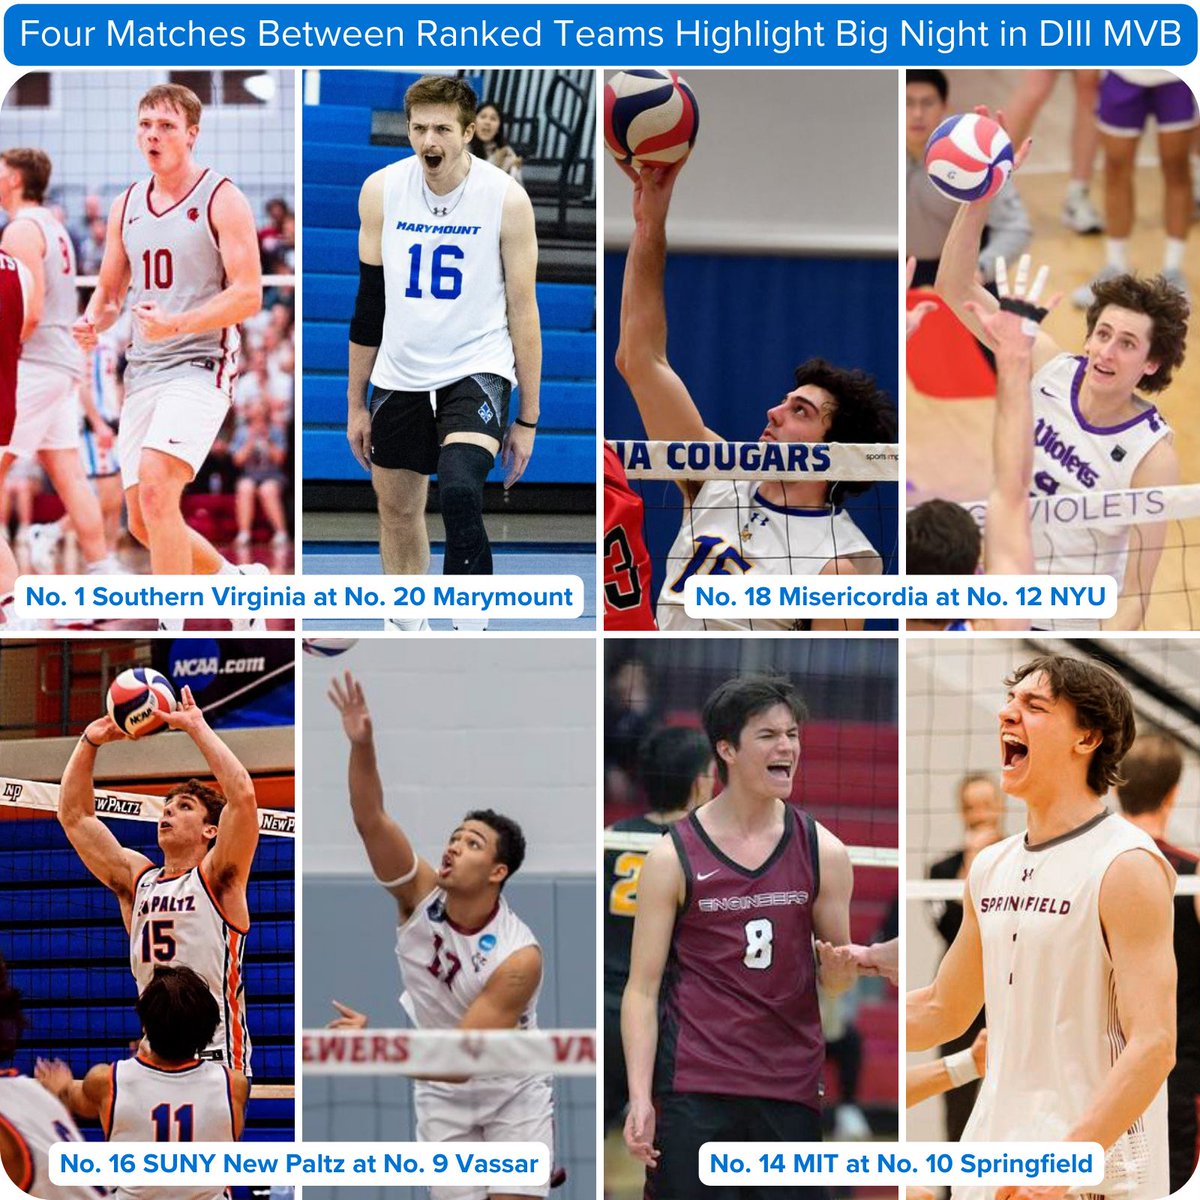 It is a huge Wednesday in Division III men’s volleyball, as 13 of the teams in the new AVCA/NVA Top 20 Poll are in action. Tonight’s schedule includes four matches between ranked teams. Streaming info: avca.org/news-events/vo… #WeAreAVCA #NCAAMVB